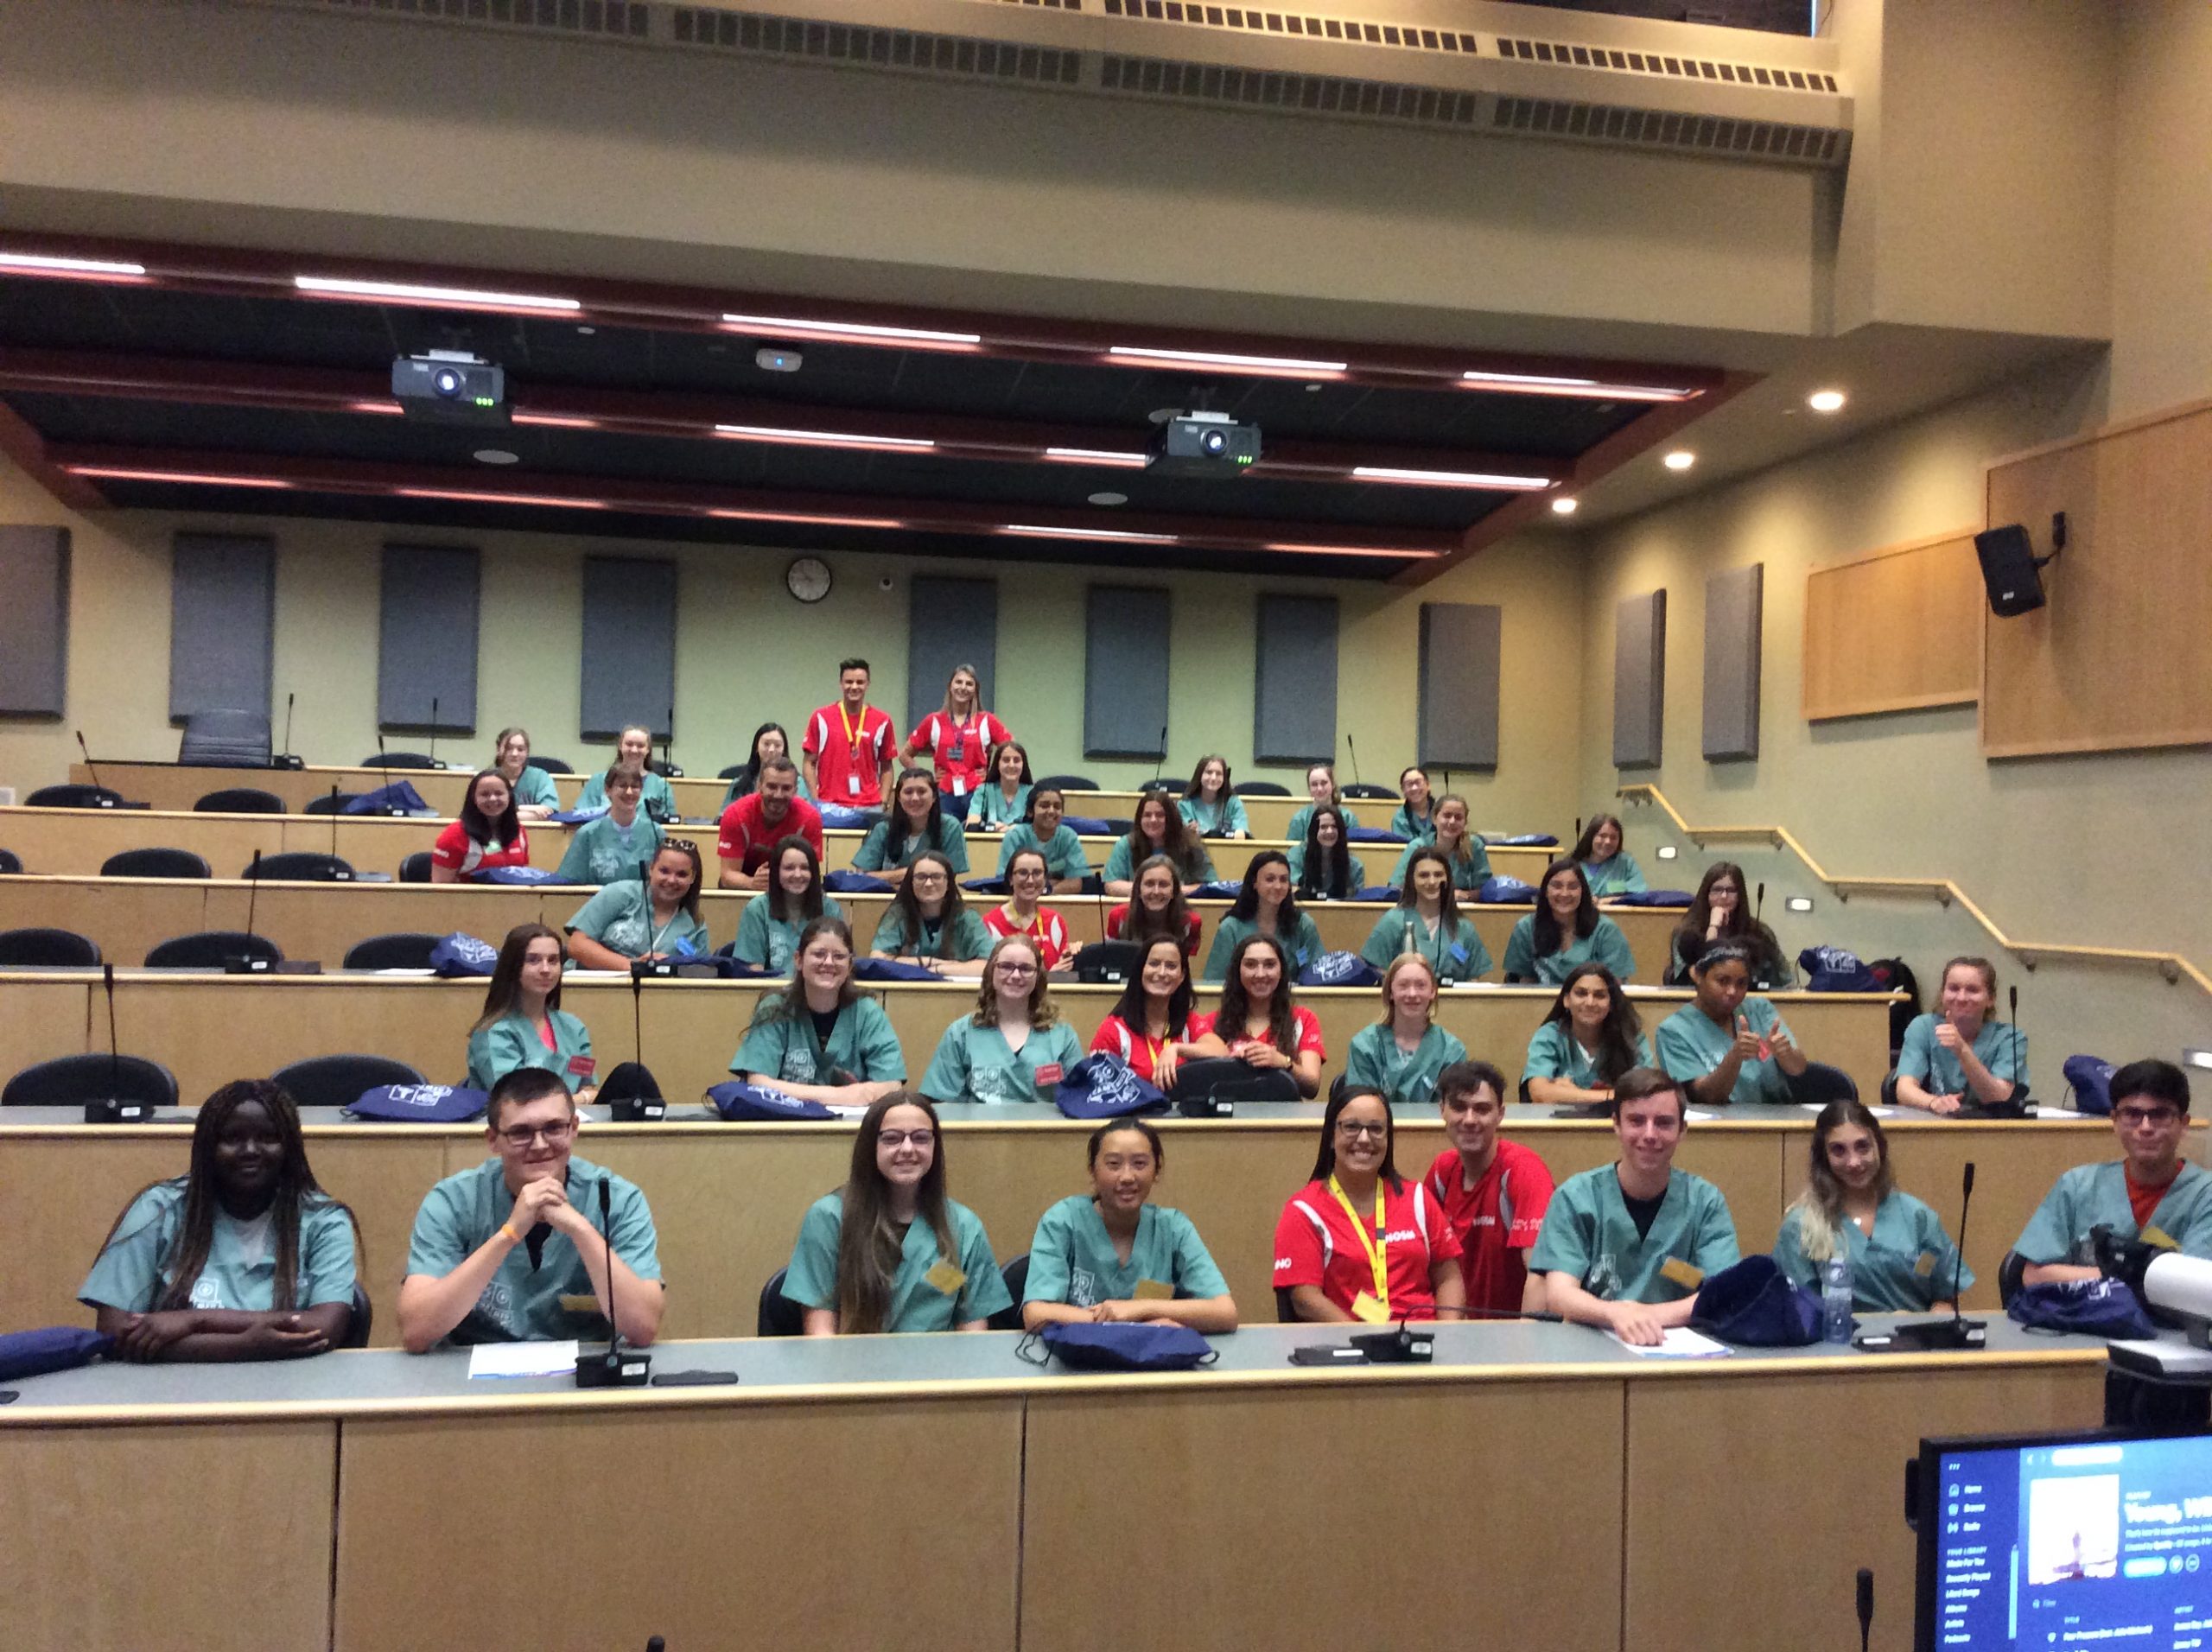 Group shot of campers and team leads in lecture style classroom in Sudbury.